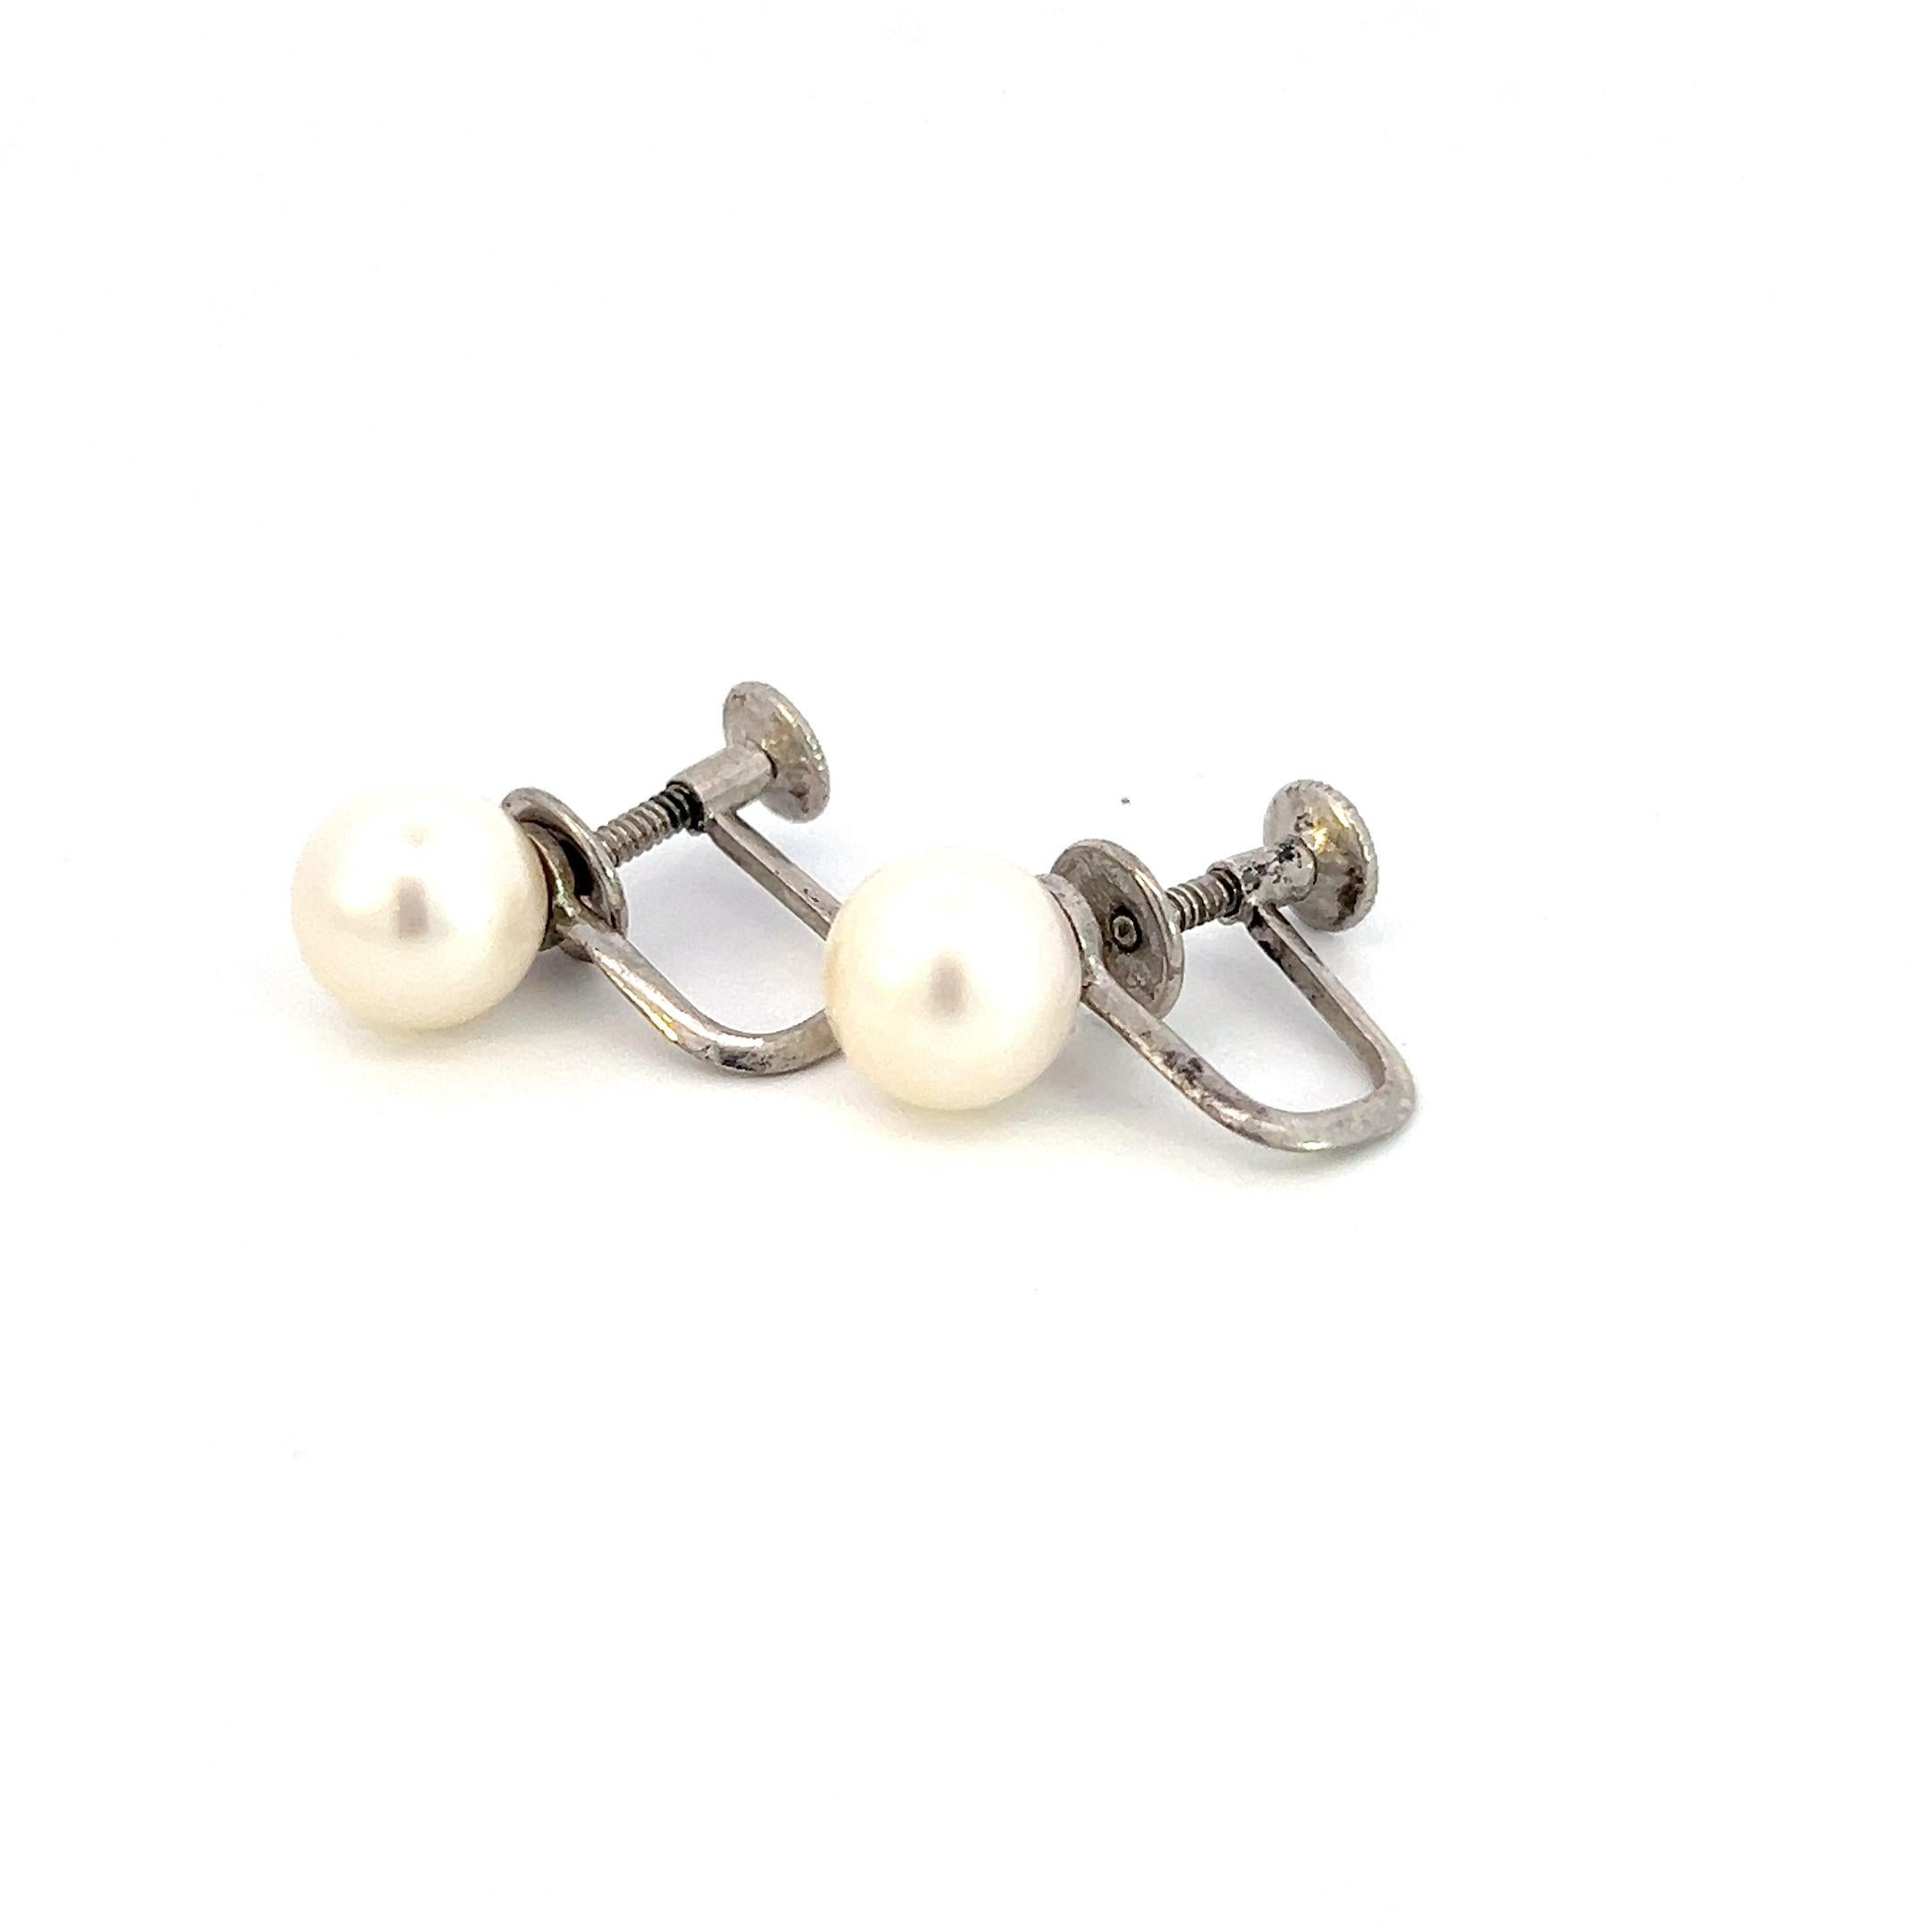 Mikimoto Estate Akoya Pearl Earrings Silver 8 mm M338

These elegant Authentic Mikimoto Estate Akoya pearl earrings are made of Sterling Silver and have 2 Akoya Cultured Pearls in size of 8 mm appx with a weight of 3.1 grams.

TRUSTED SELLER SINCE